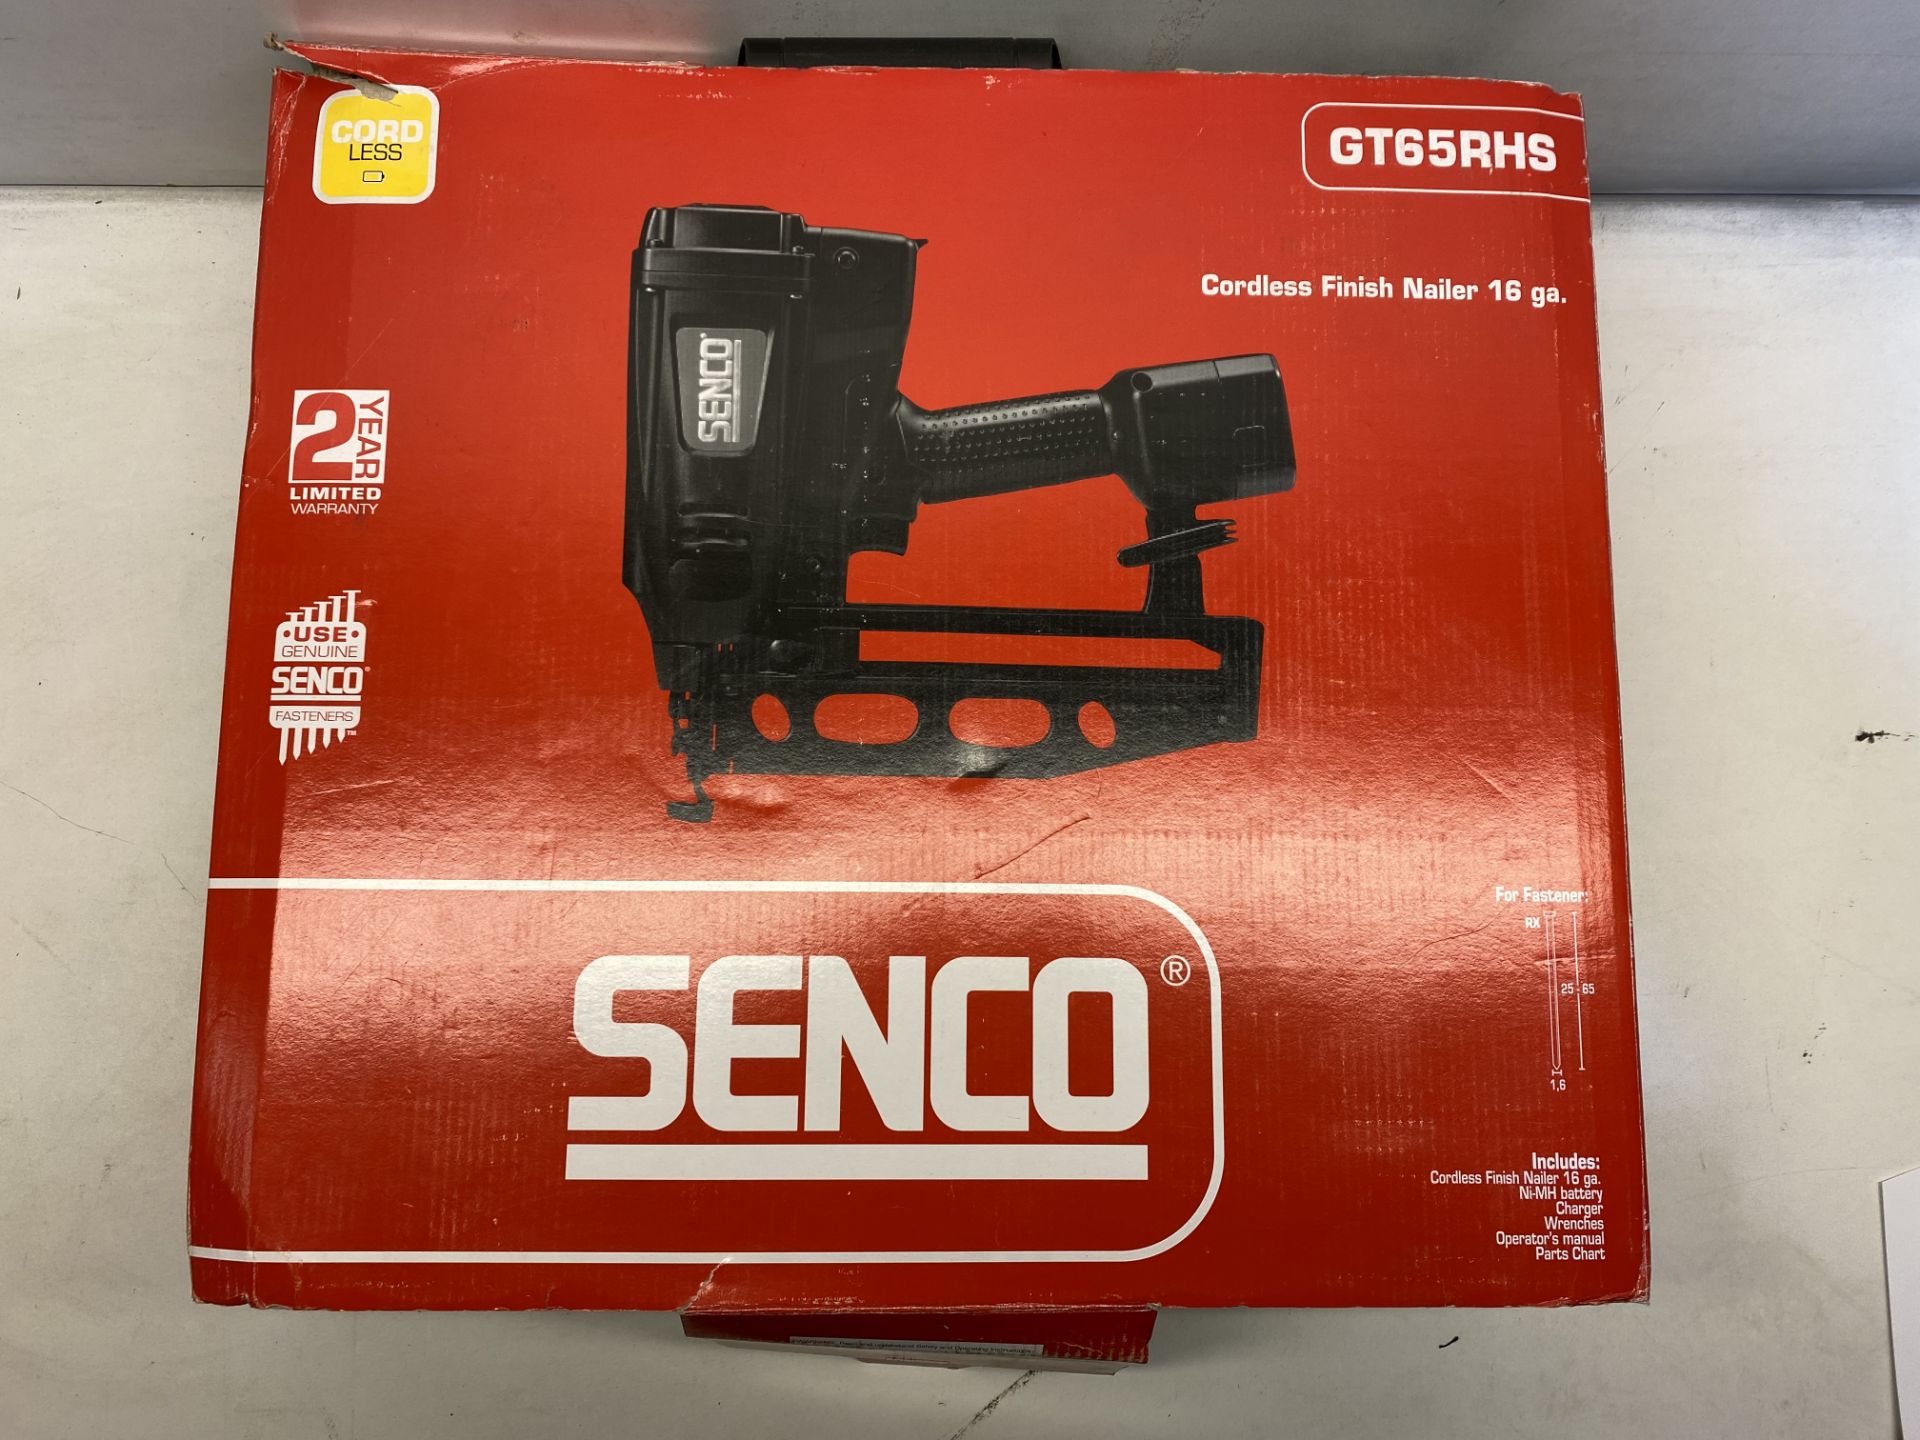 Senco GT65RHS Cordless Finish Nailer | Empty Carry Case - Image 4 of 4